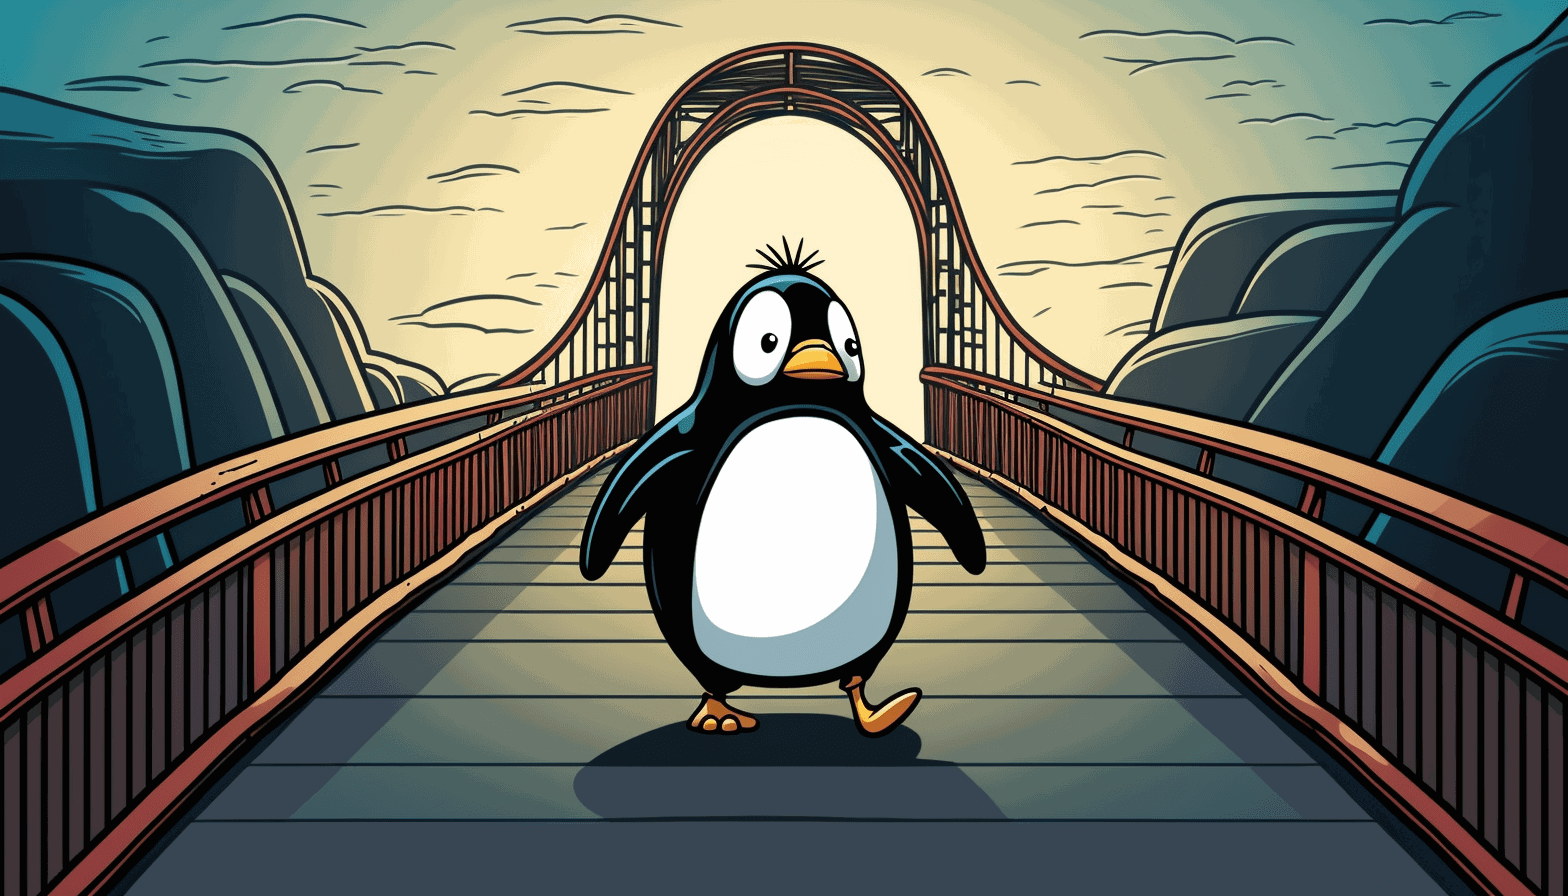 A friendly cartoon Linux penguin confidently walking over a bridge to a successful future.